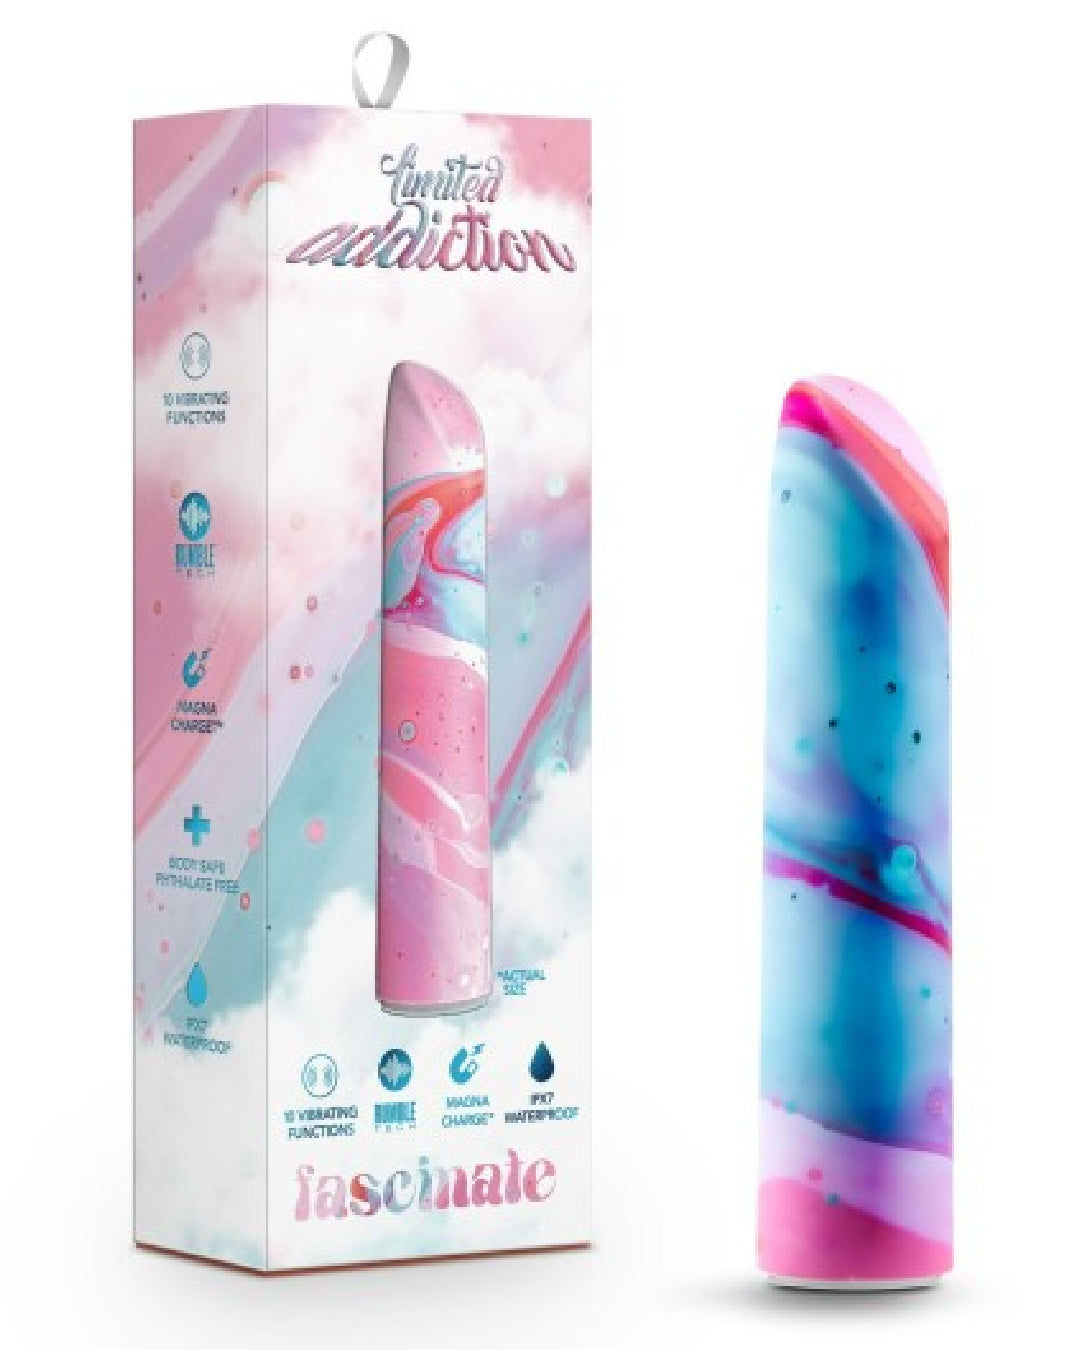 Limited Addiction Power Bullet Vibe - Fascinate next to box 